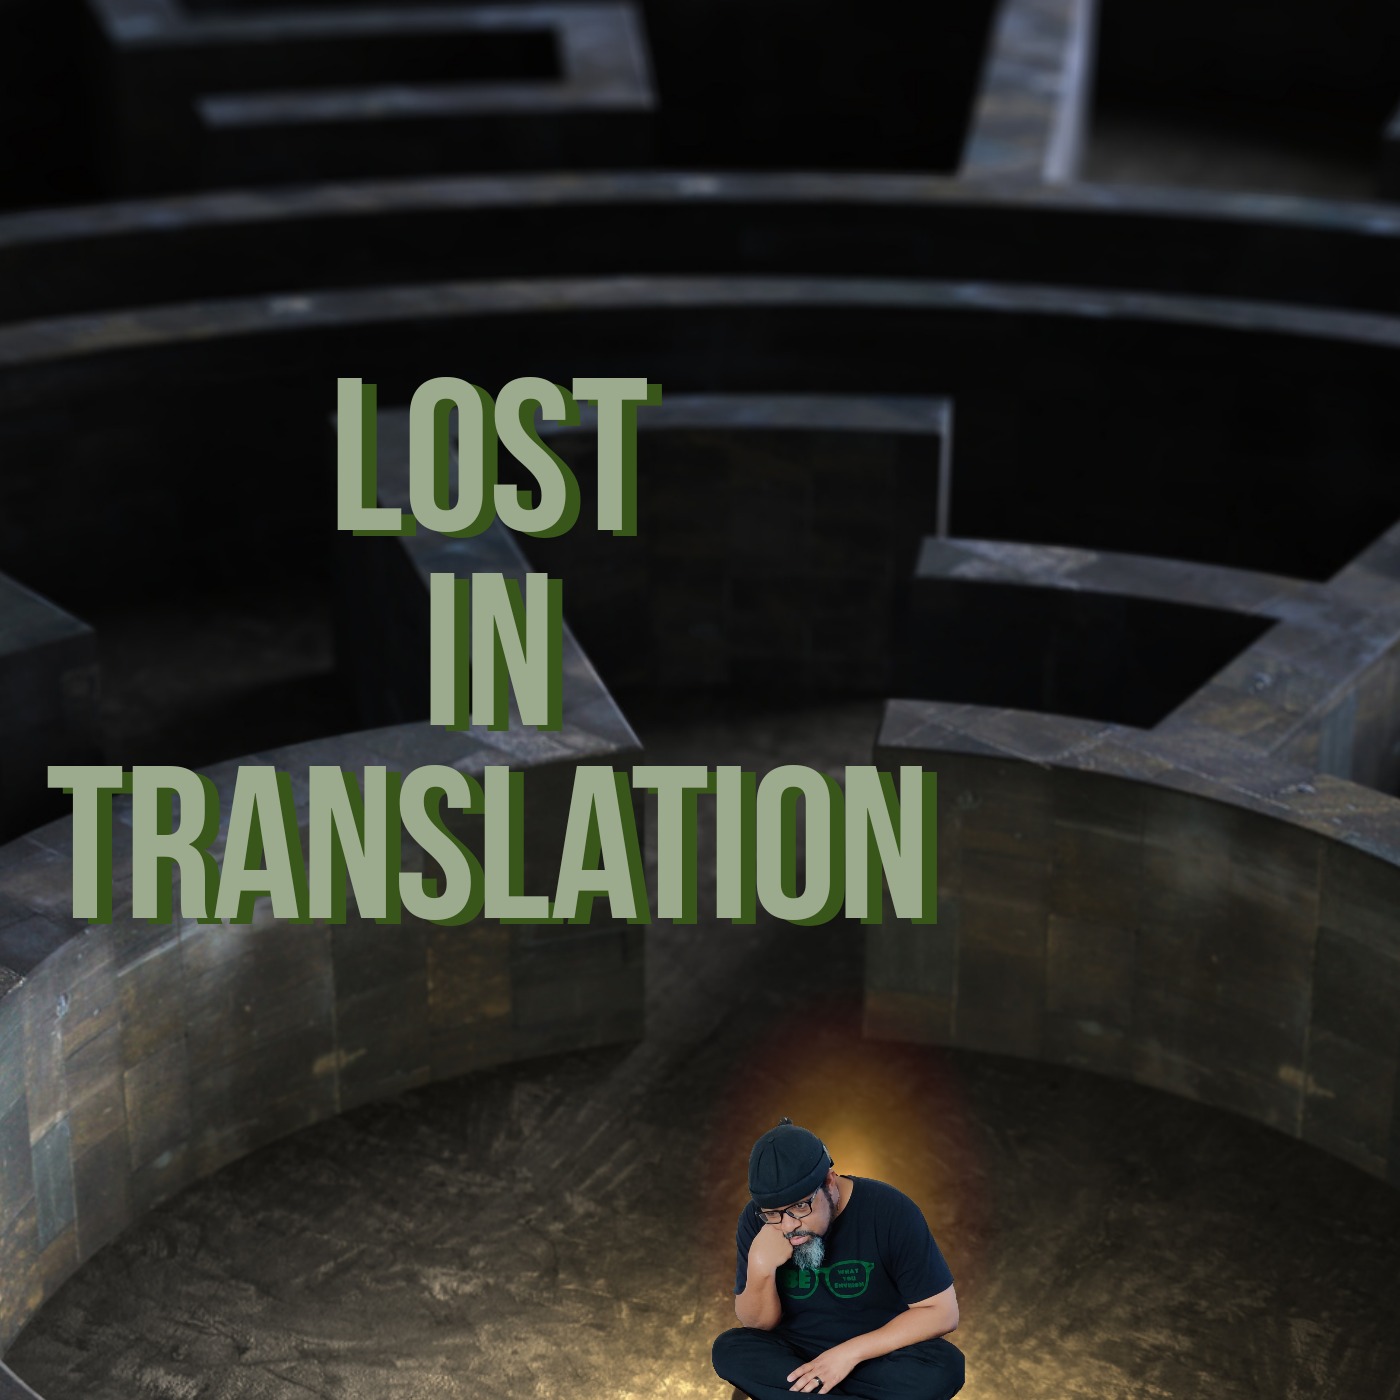 Vol. 2 Chapter 24: Lost In Translation